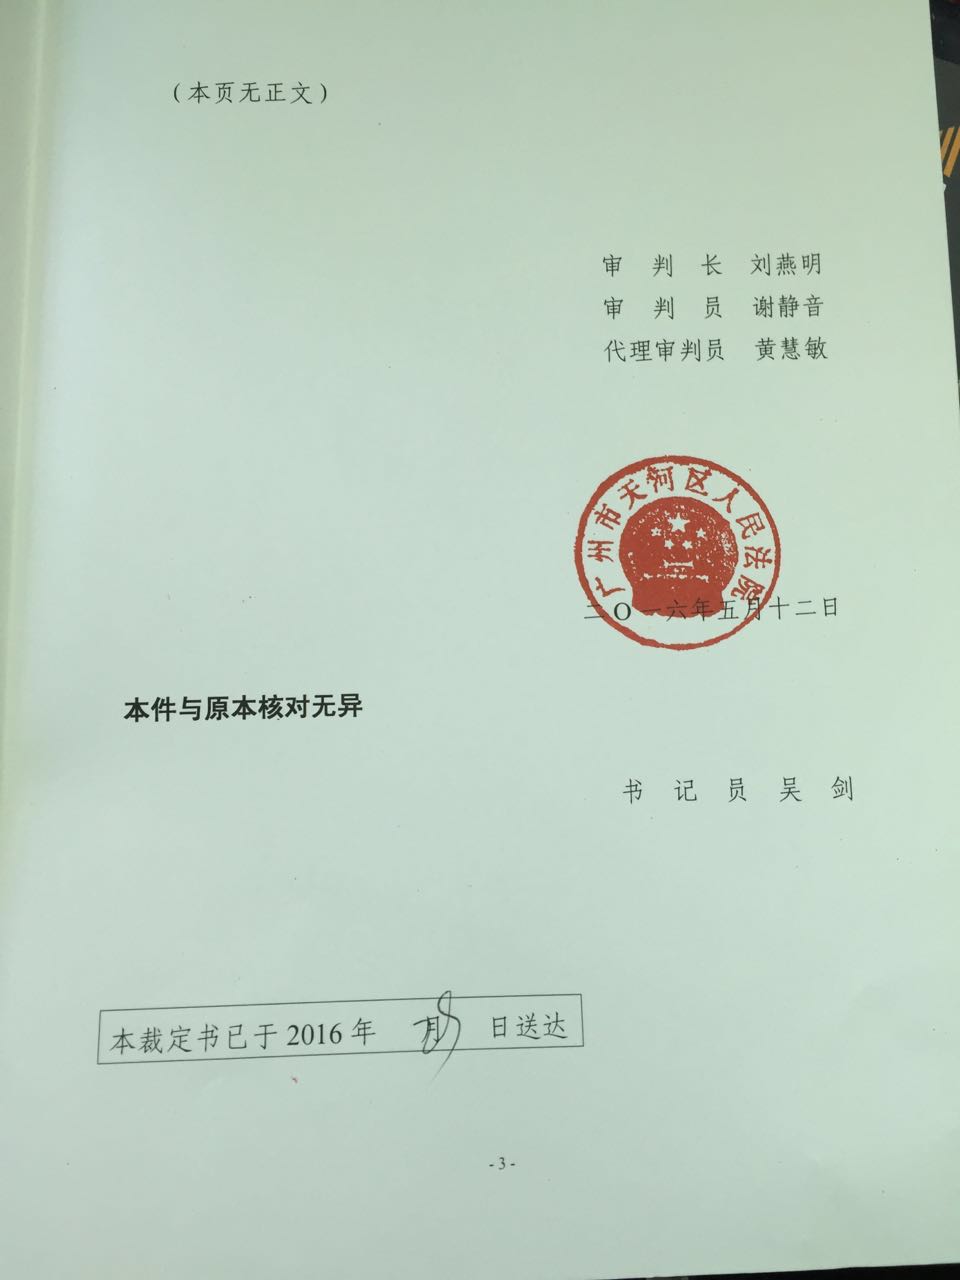 Civil ruling by Guangzhou Tianhe District People’s Court (page 3)